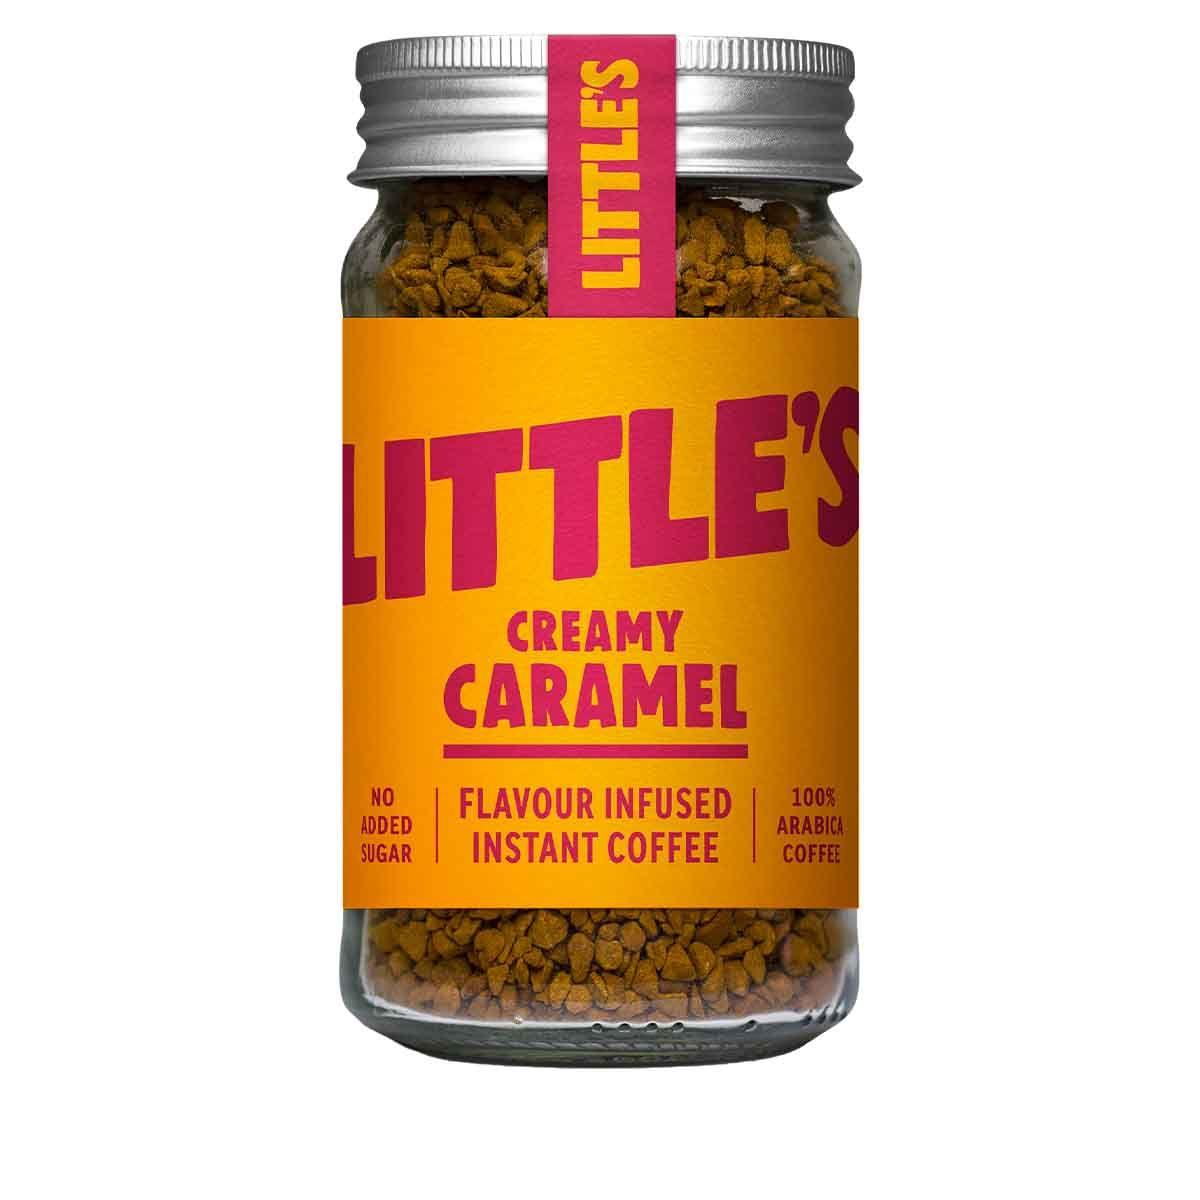 Littles - Flavoured Instant Coffee Creamy Caramel - 50g - Vending Superstore